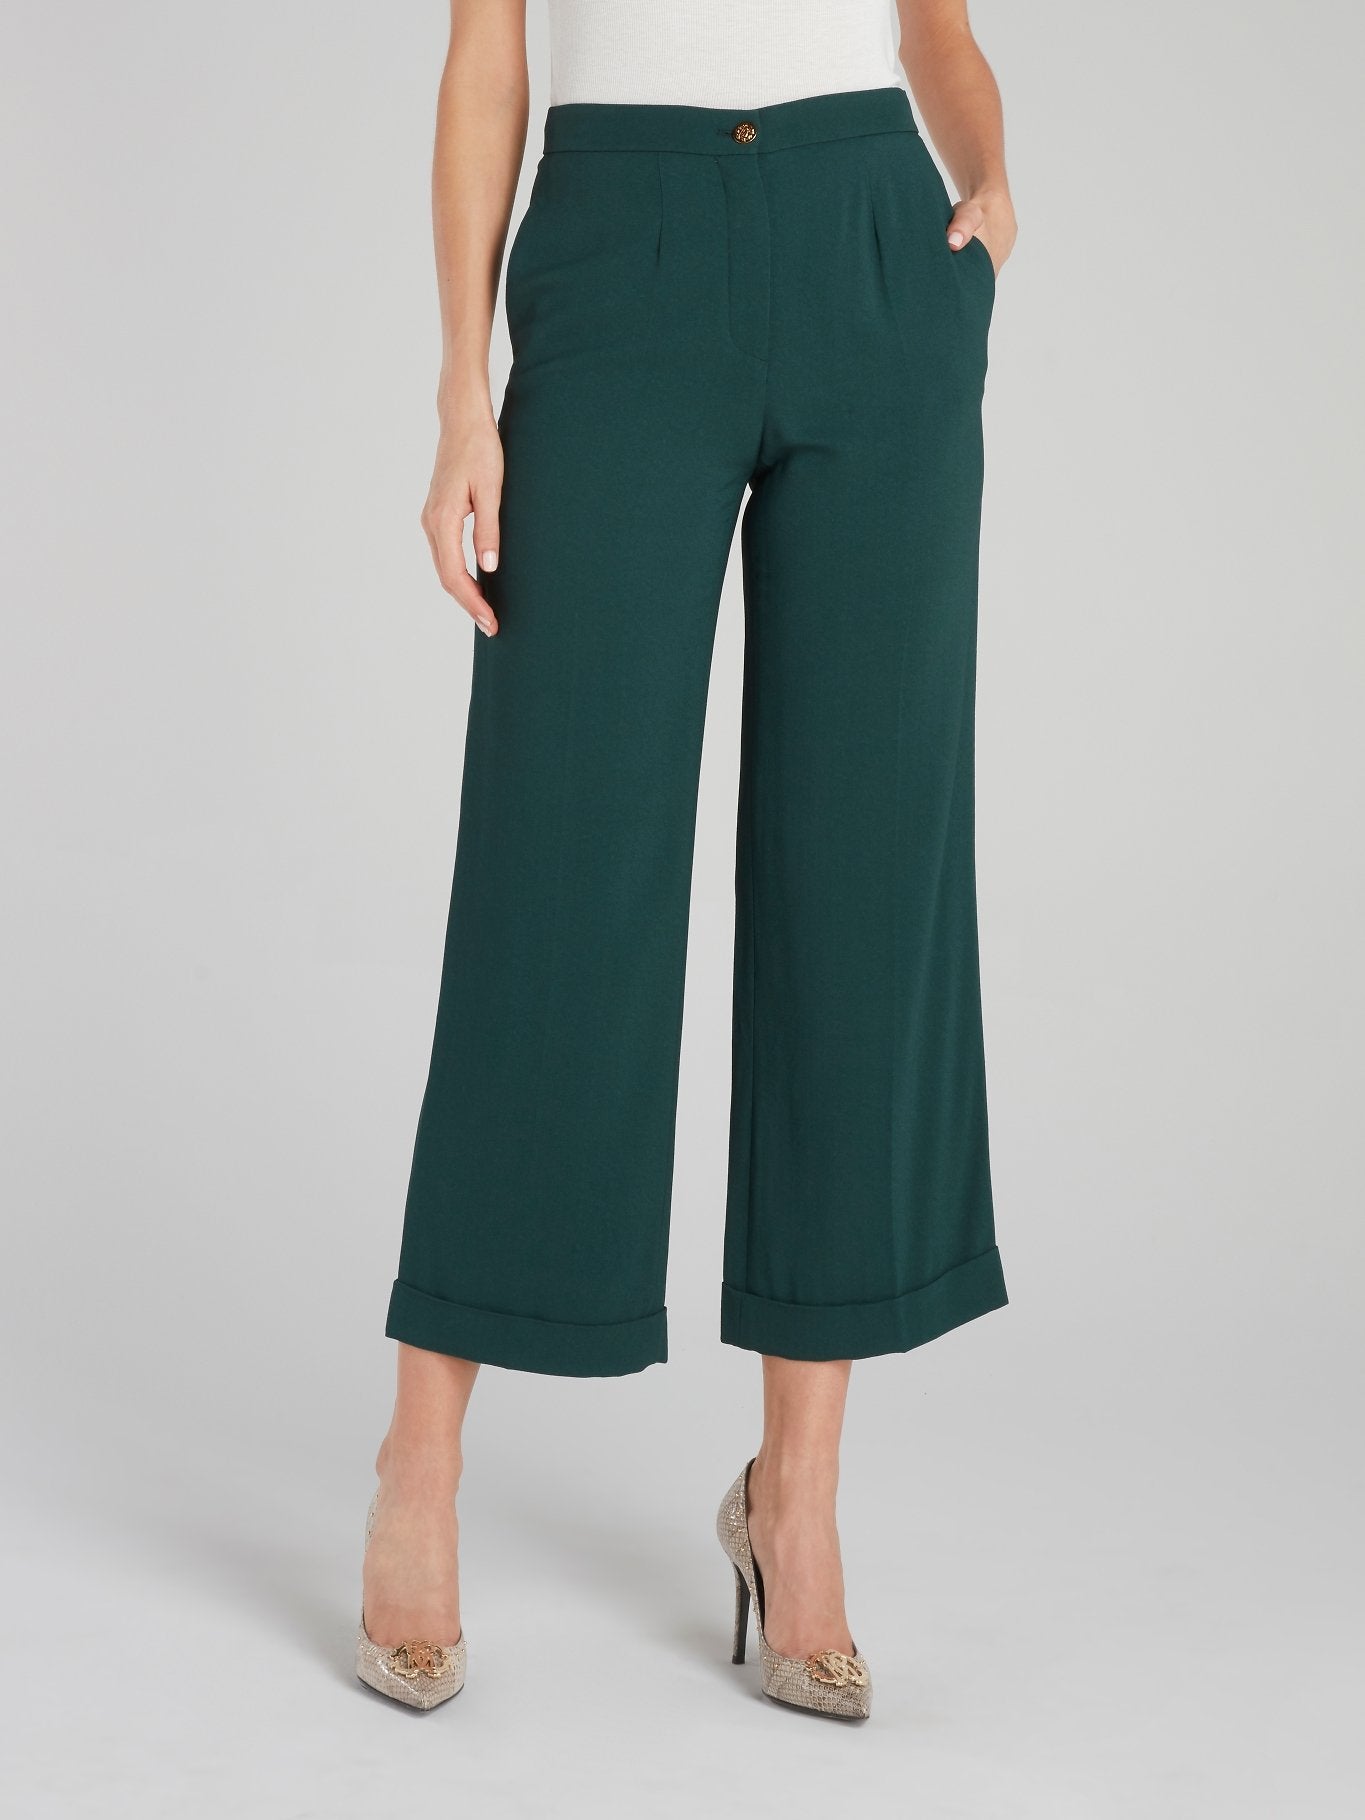 Green Flared Culottes